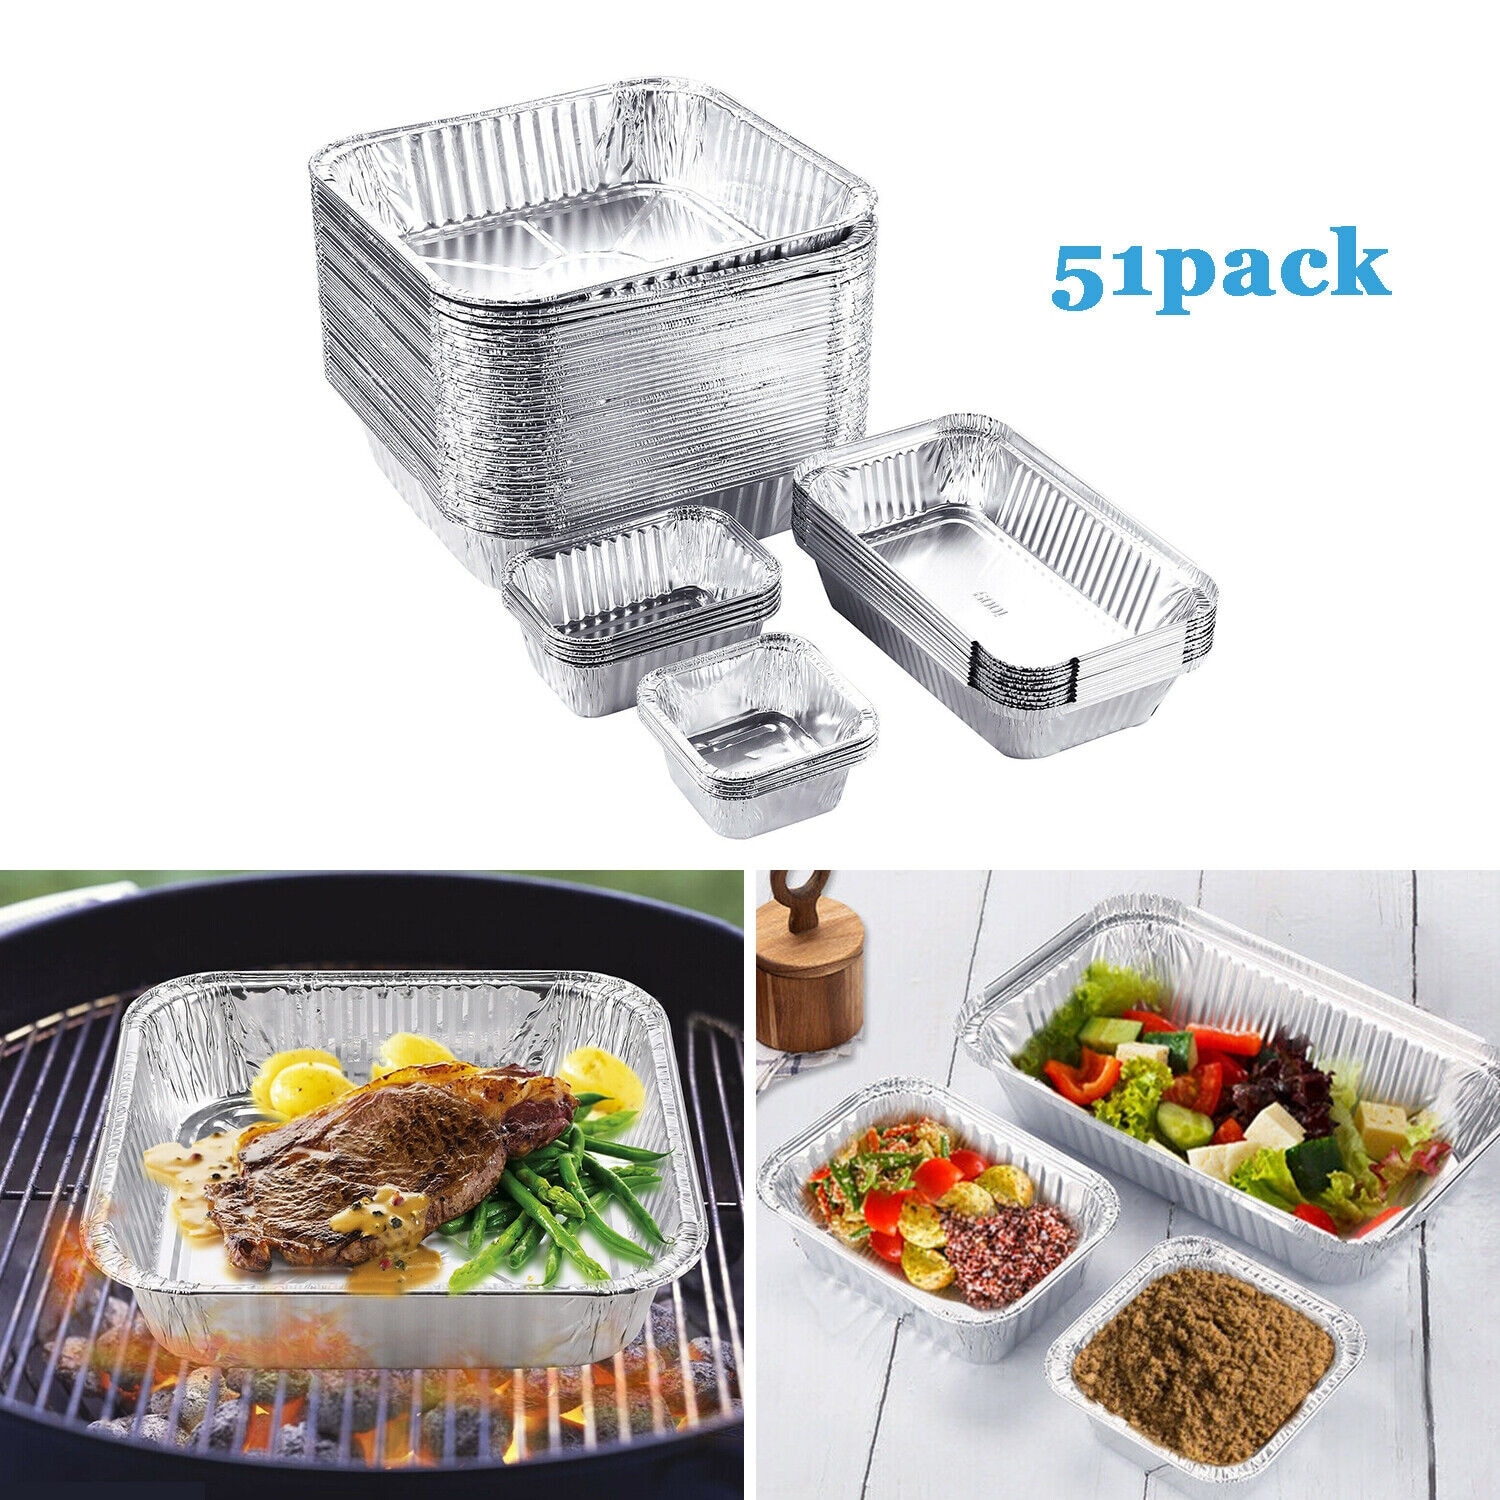 https://ak1.ostkcdn.com/images/products/is/images/direct/af6d1078584be377ab56dfac01102ee44254fe33/IMAGE-51-Packs-Aluminum-Pans-Disposable-Heavy-Duty-Tin-Foil-Pans.jpg